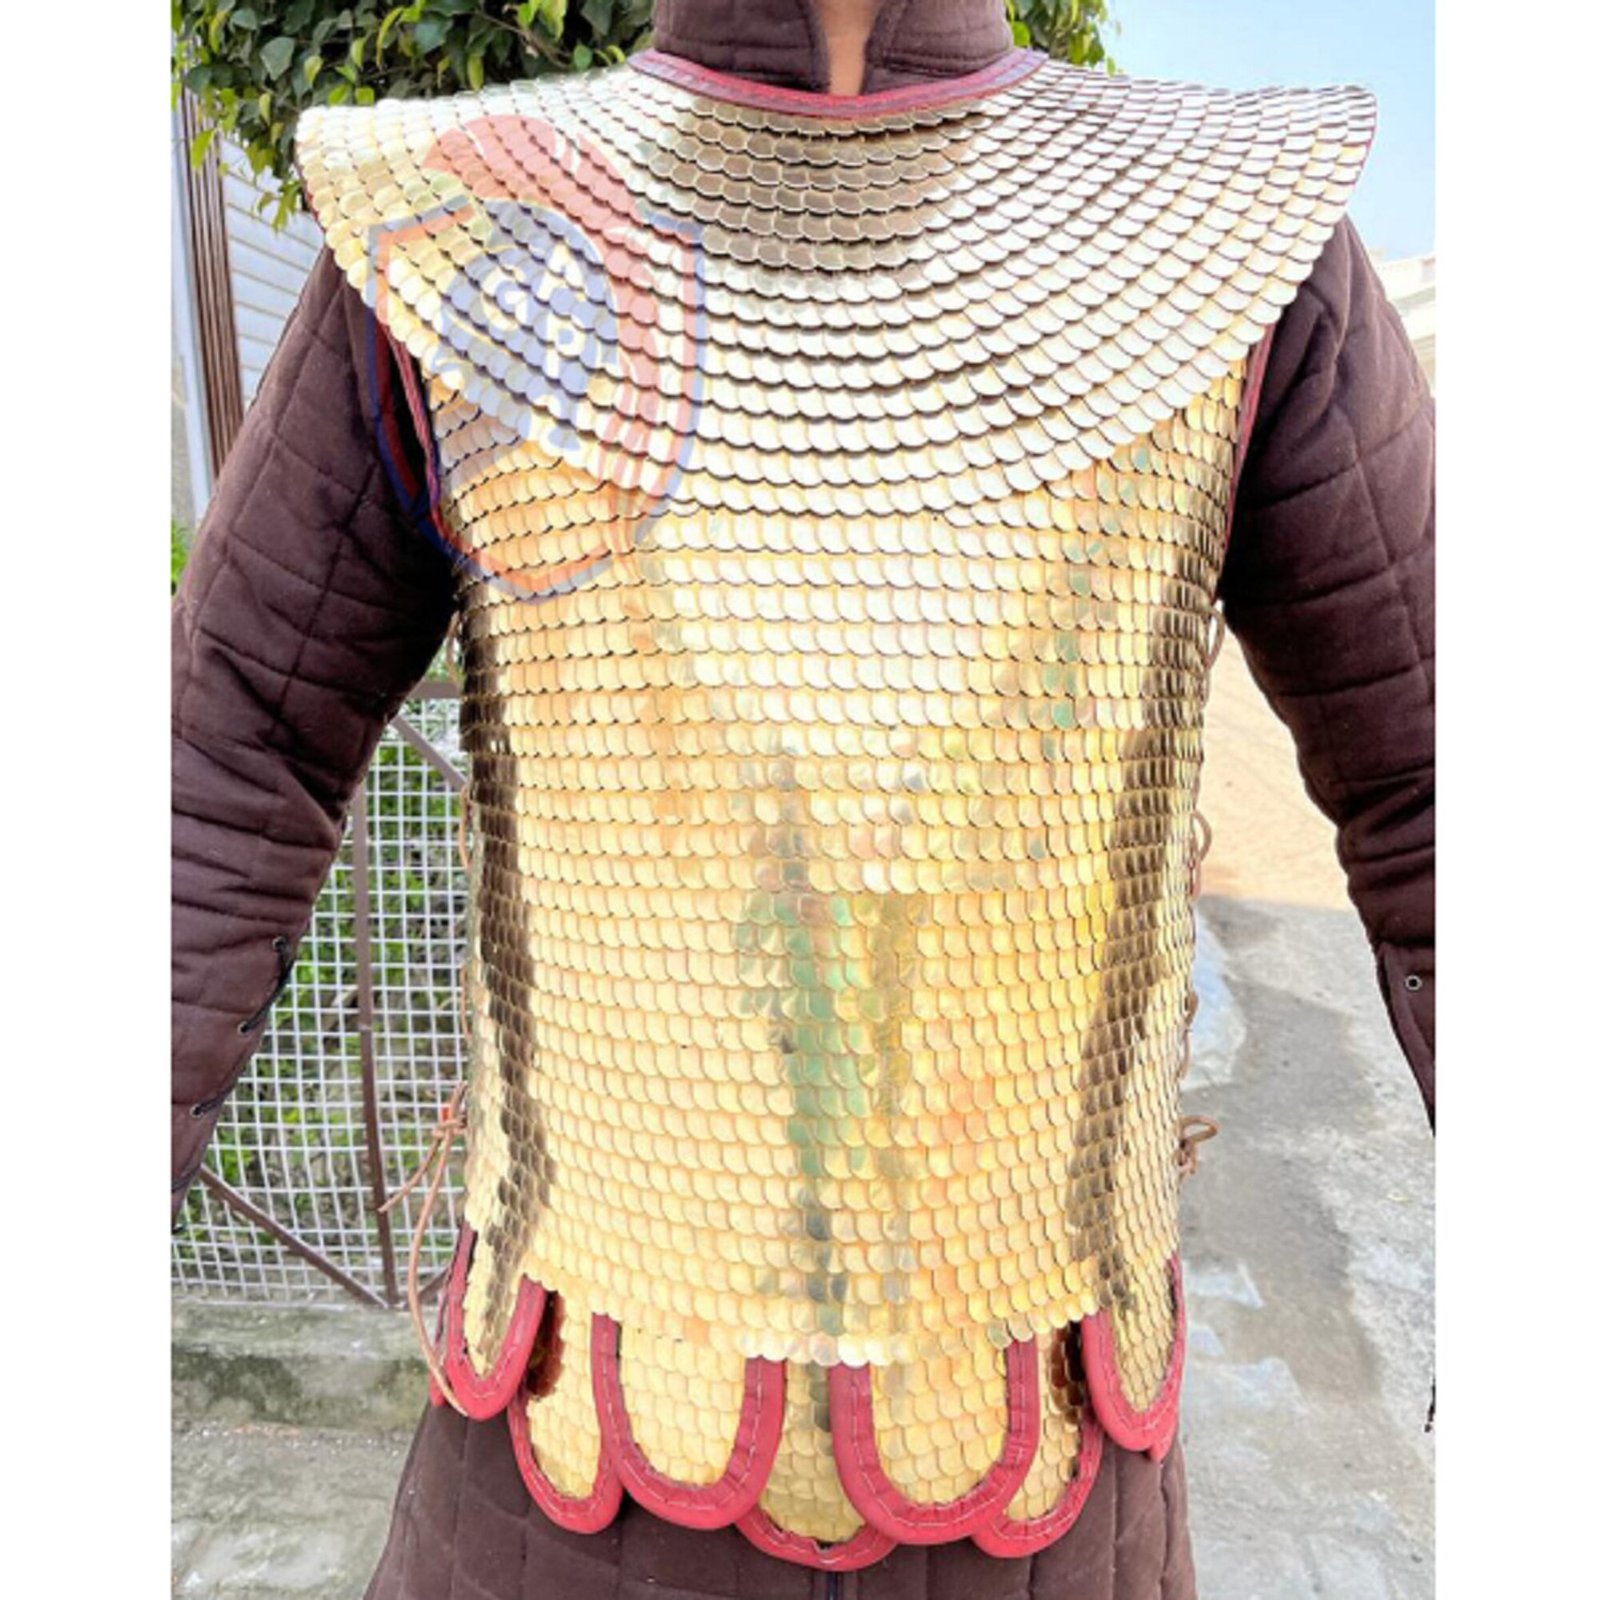 Lorica Squamata, Brass Scale Armour with Shoulder Doubling